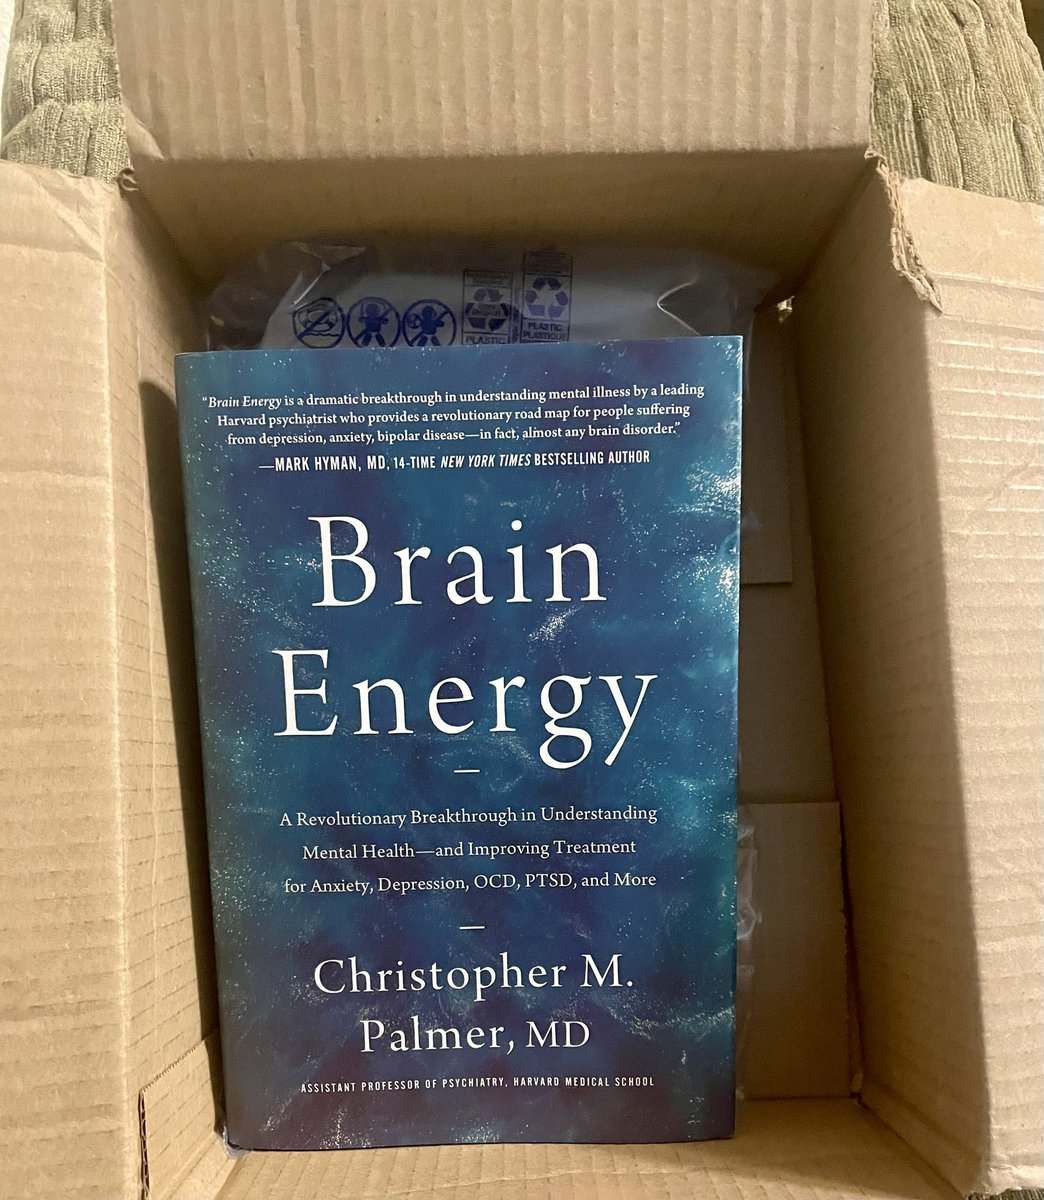 So excited!  Finally received my copy of this!!  
Definitely my pre-bed read this week!! #brainenergy 🖖